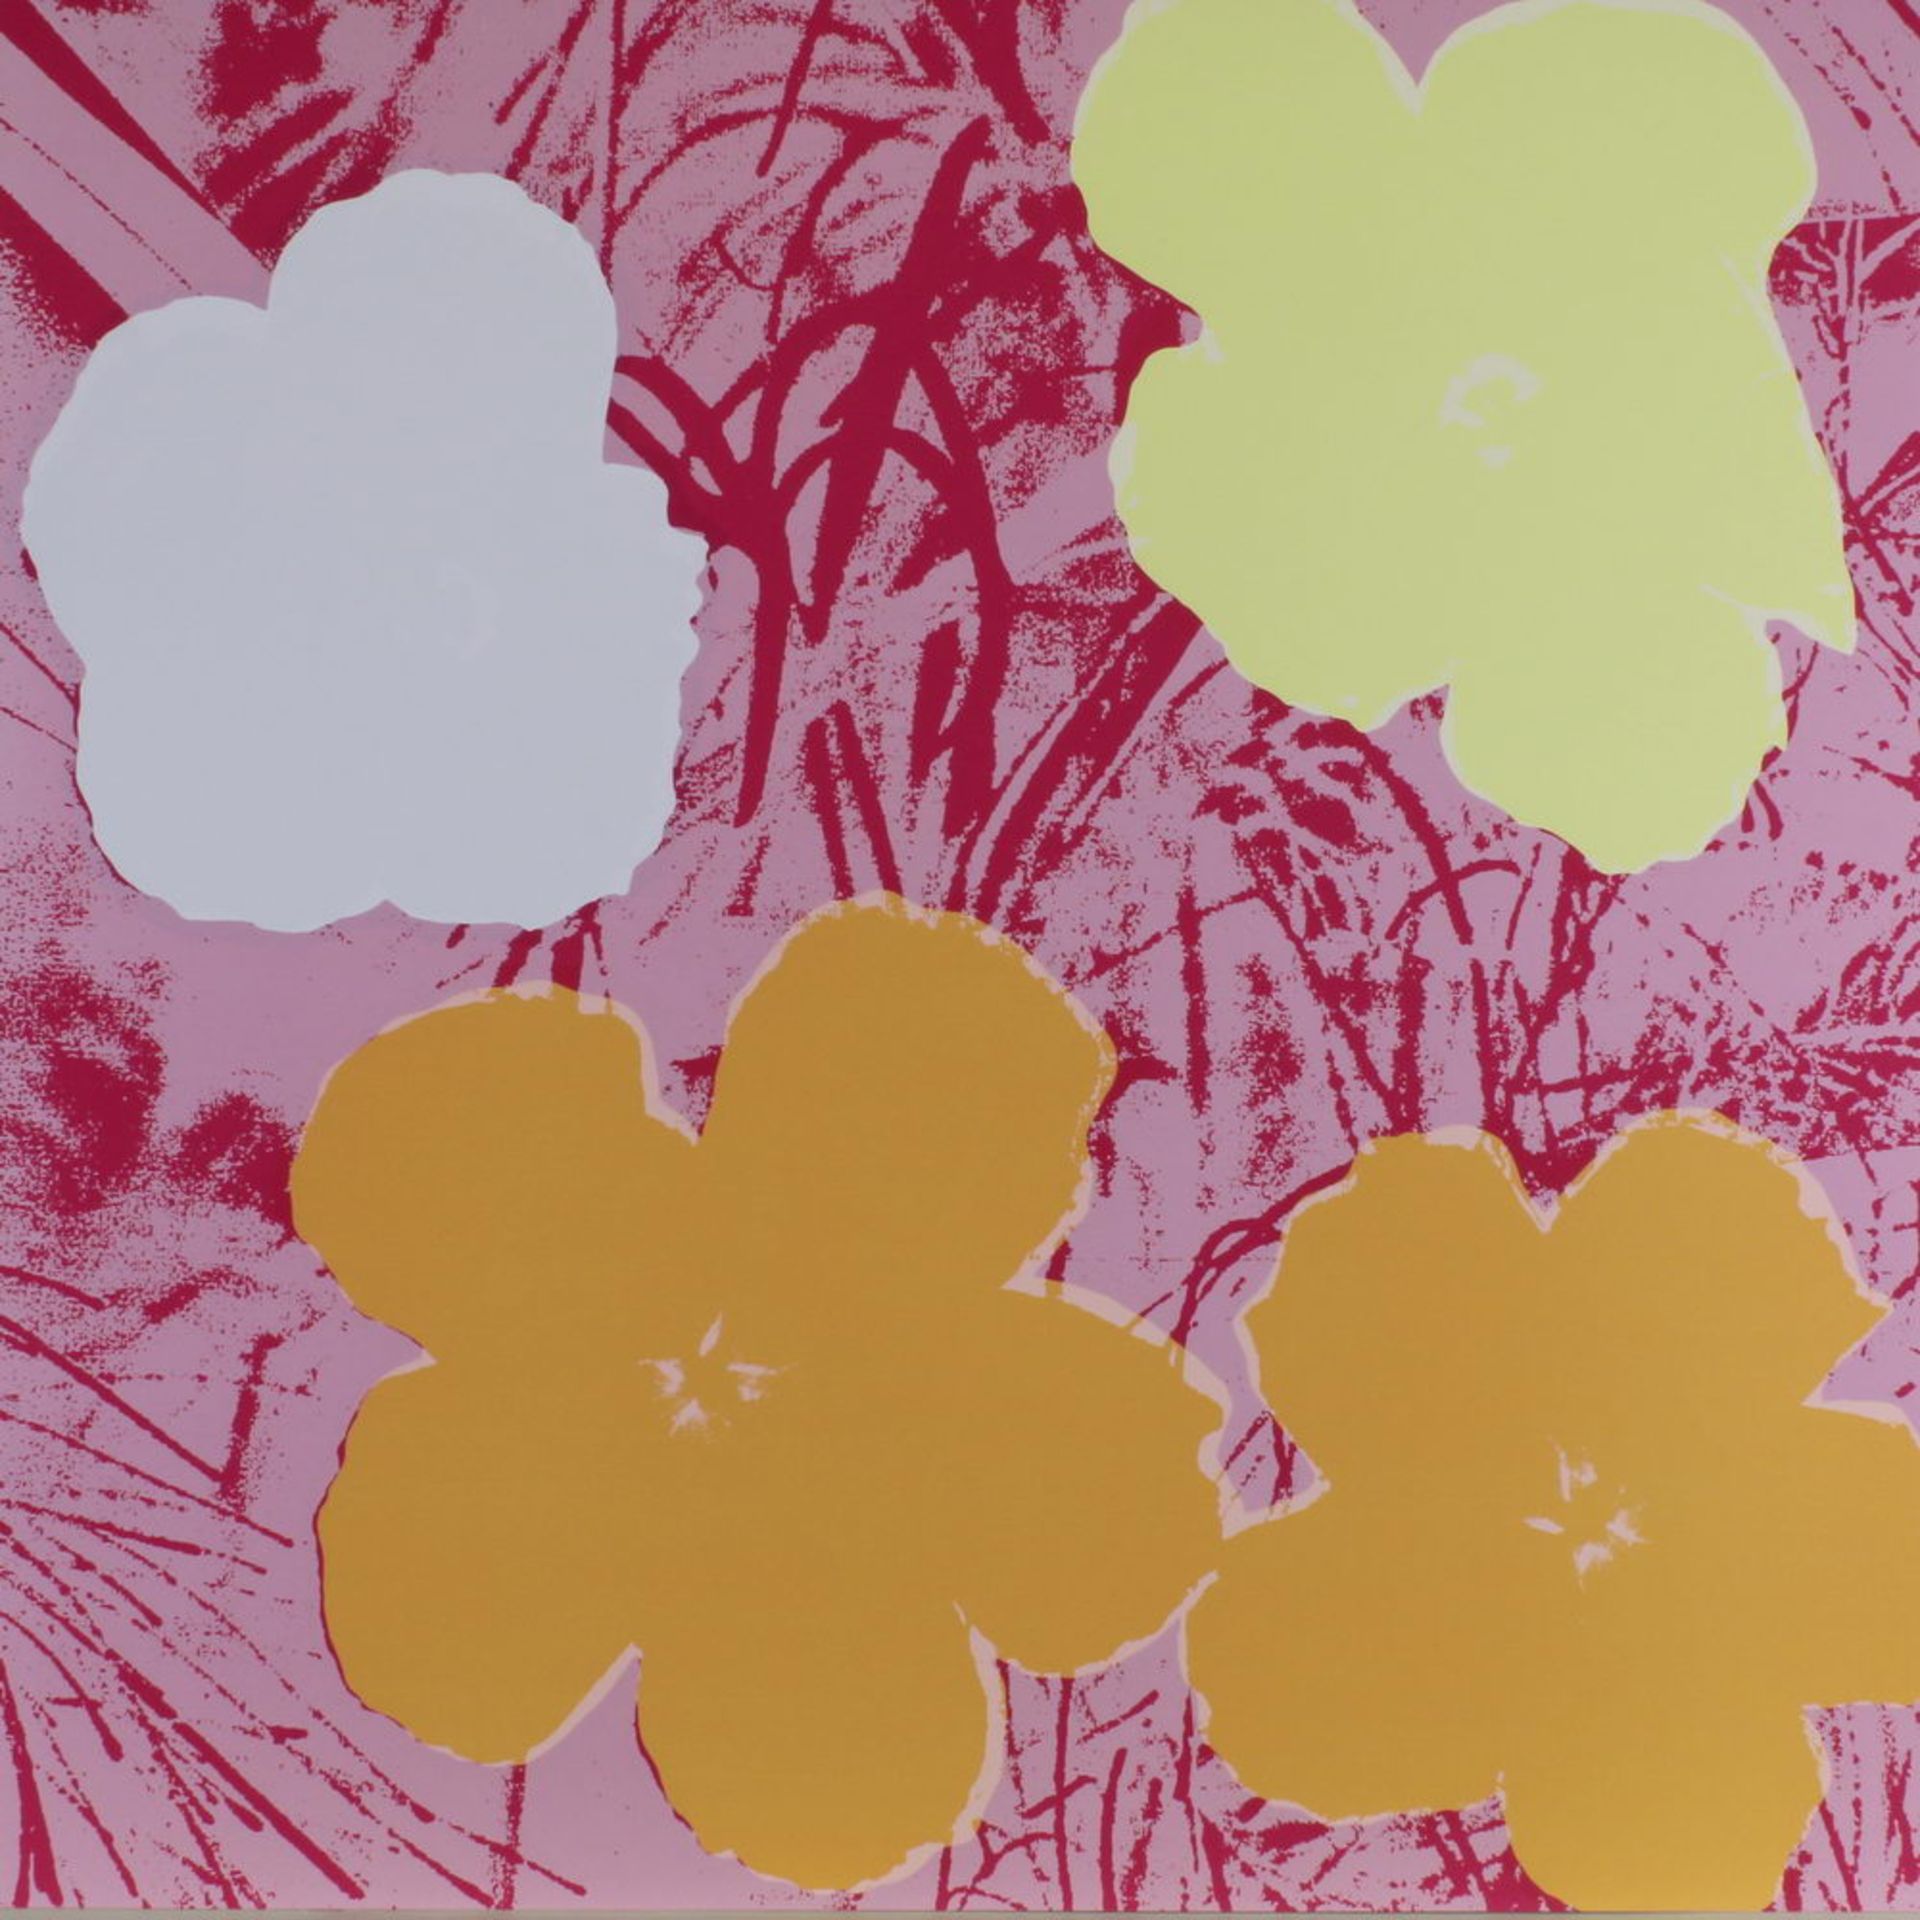 Warhol, Andy (1928 Pittsburgh - 1987 New York), 10 Farbserigrafien, "Flowers", published by Sunday - Image 9 of 10